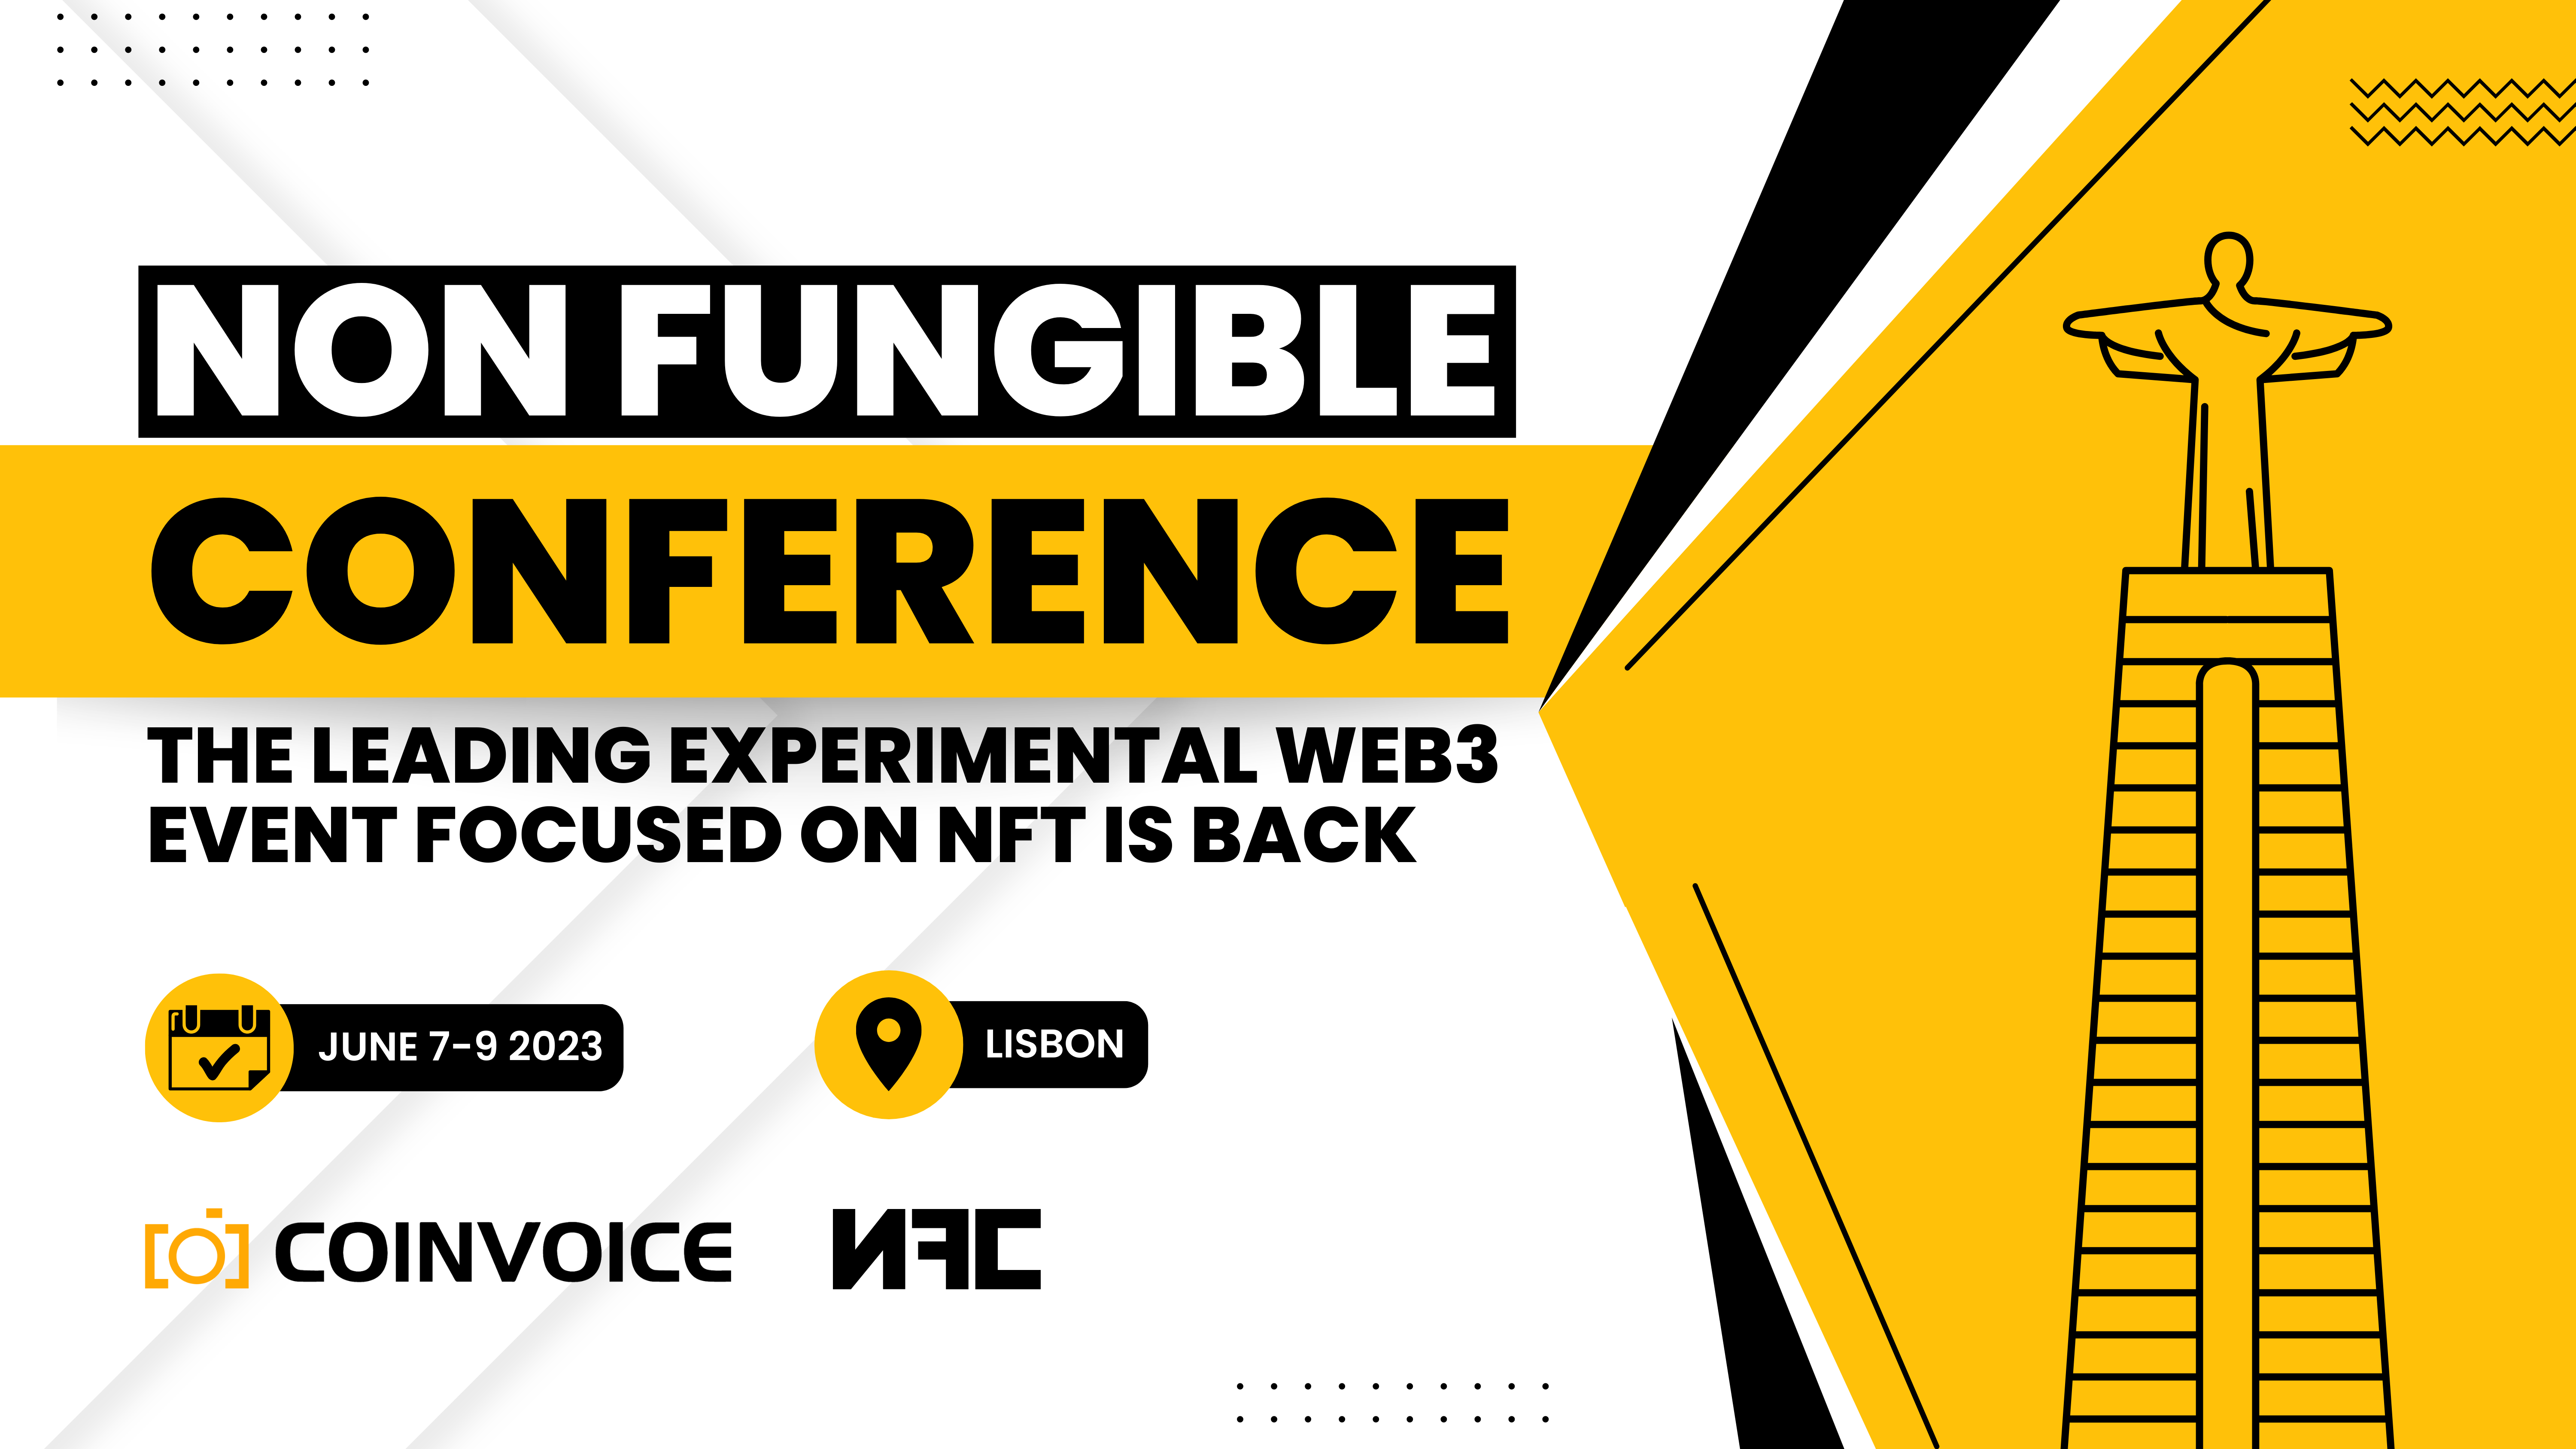 Non-Fungible Conference, the leading experimental web3 event focused on NFT is back